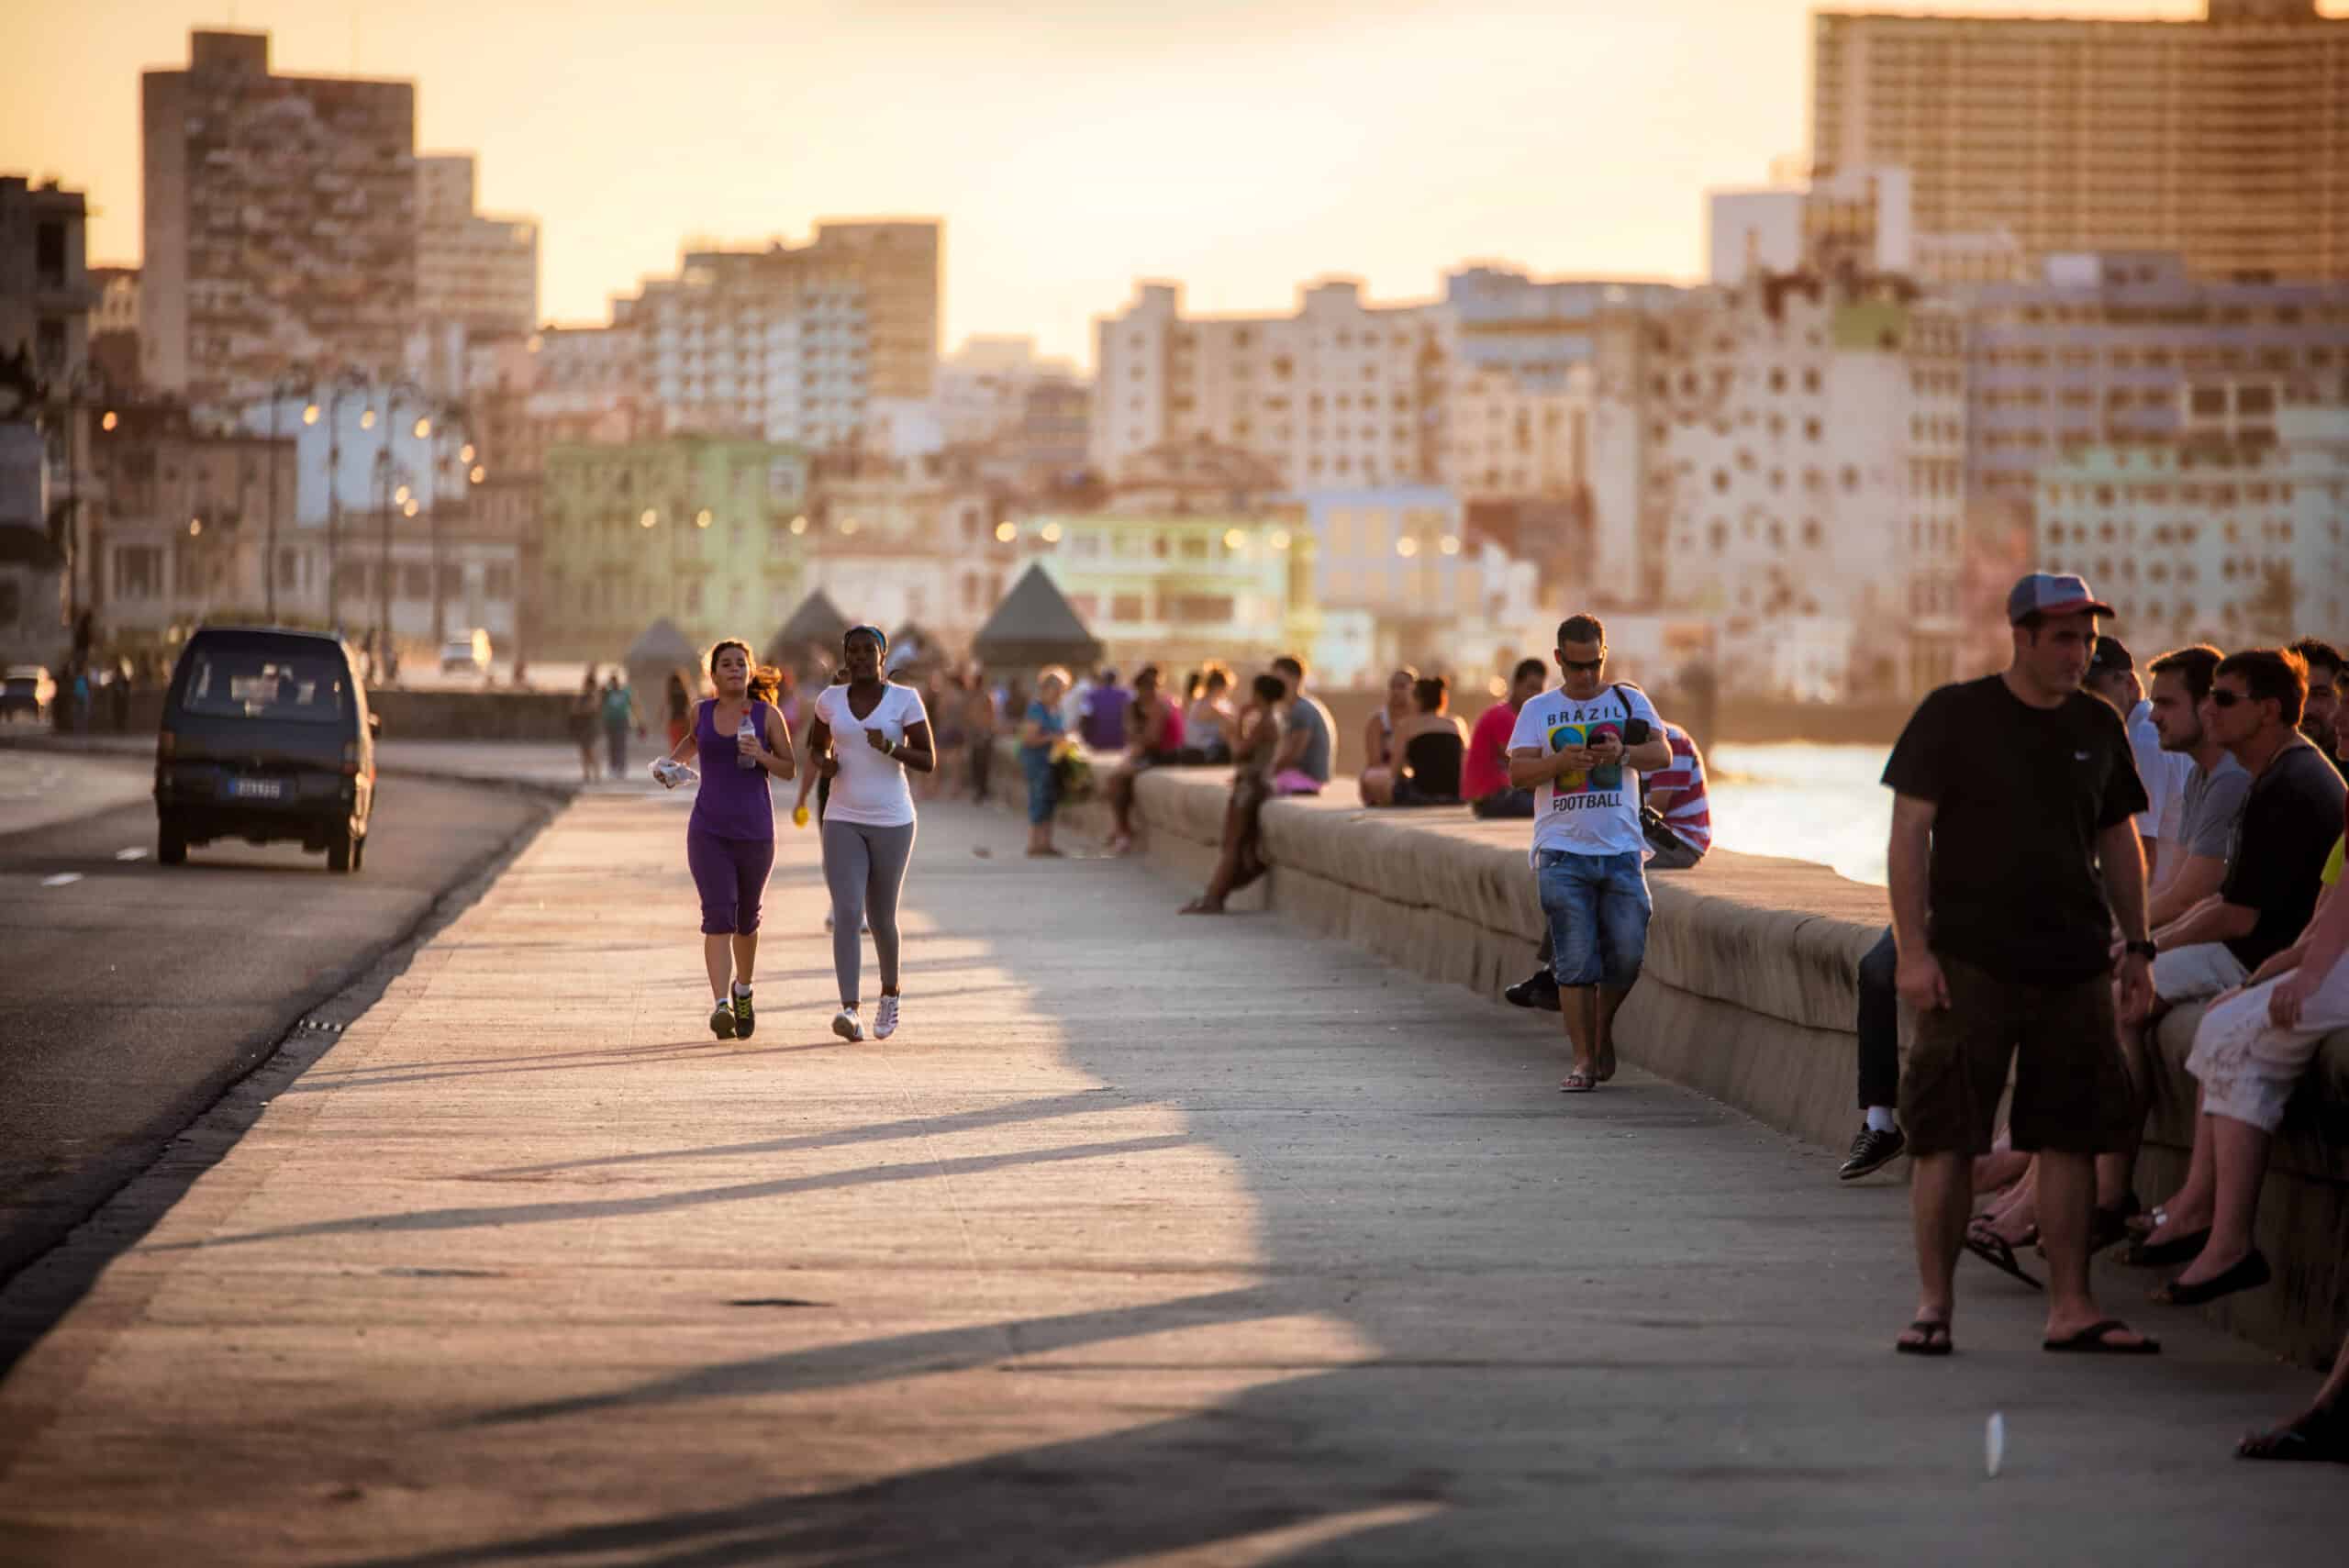 The Havana Malecon boardwalk around sunset with people walking in the golden light